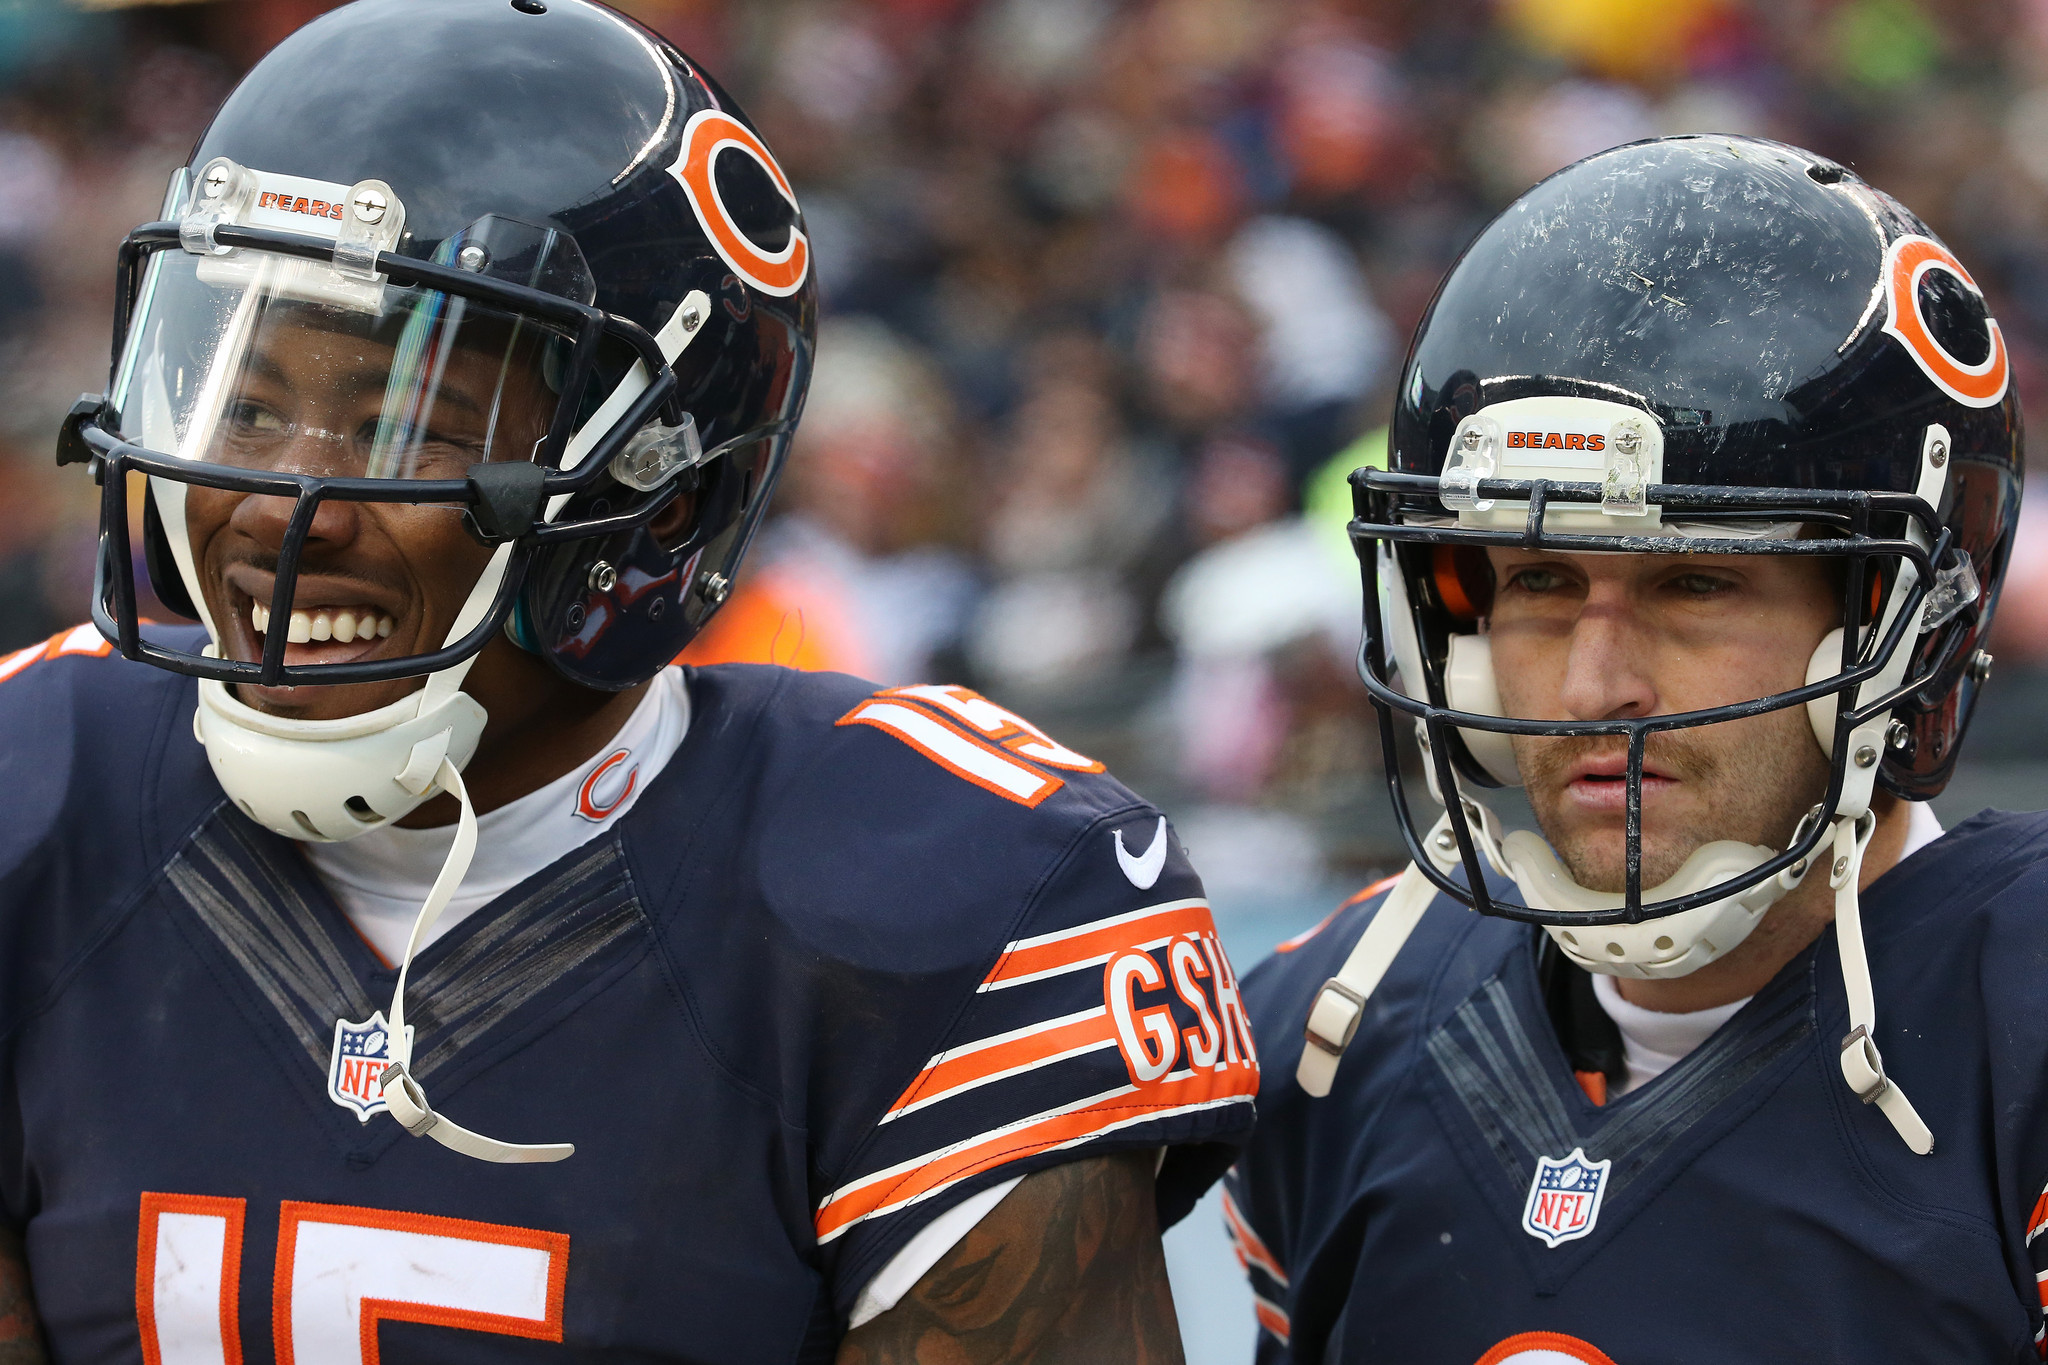 Which helps new coach more: cutting Jay Cutler or Brandon Marshall ...